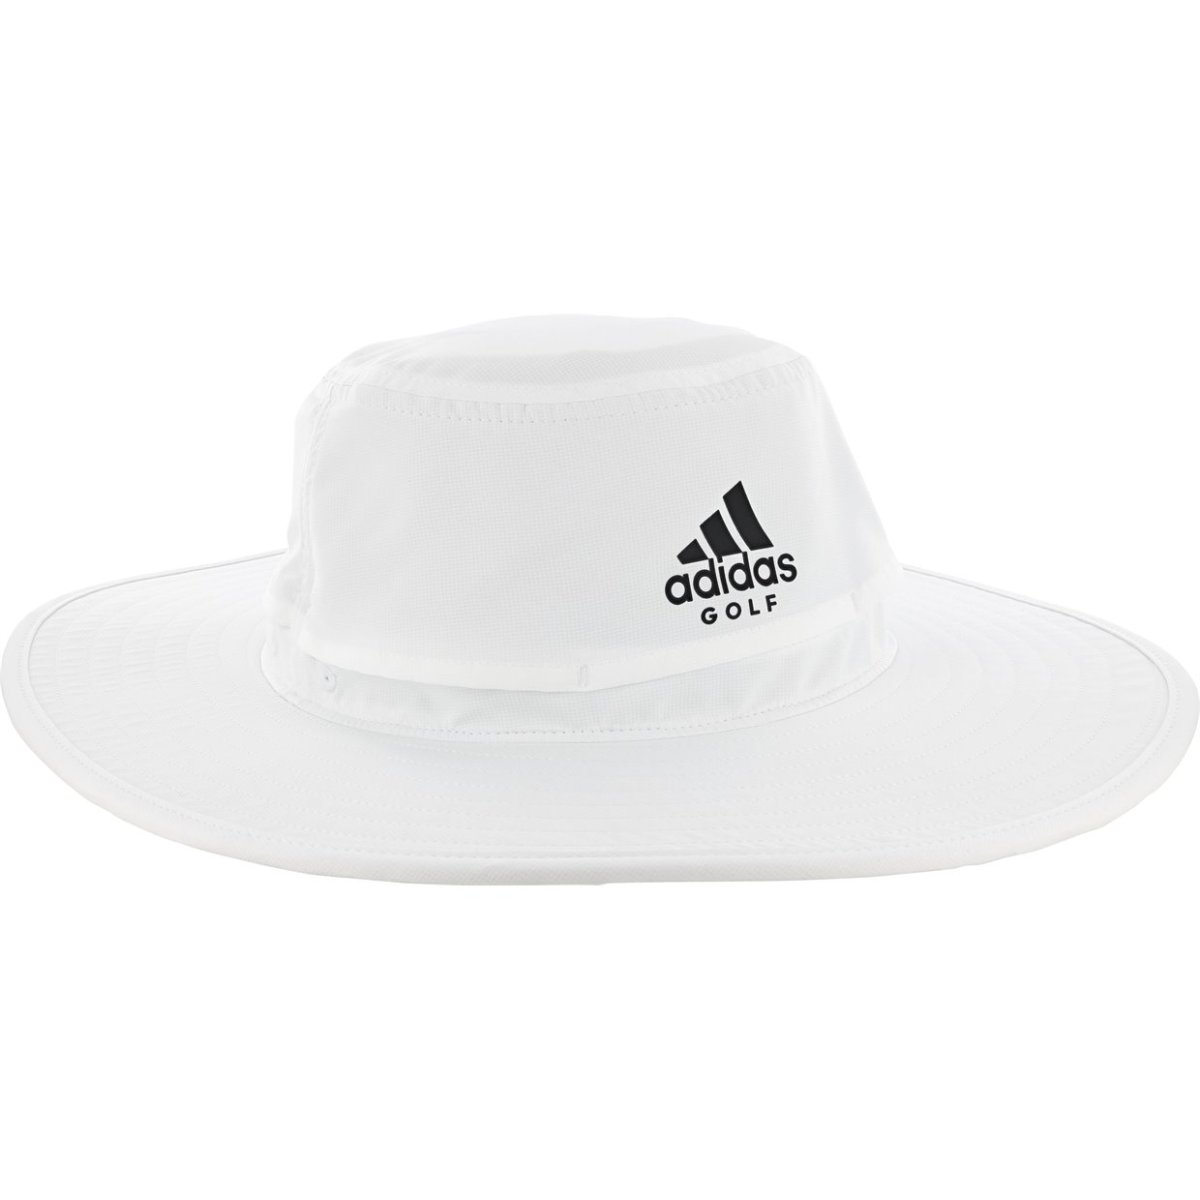 Shop the latest Adidas golf hats, like the UPF Sun golf bucket hat, on Morning Read's online pro shop, powered by GlobalGolf.